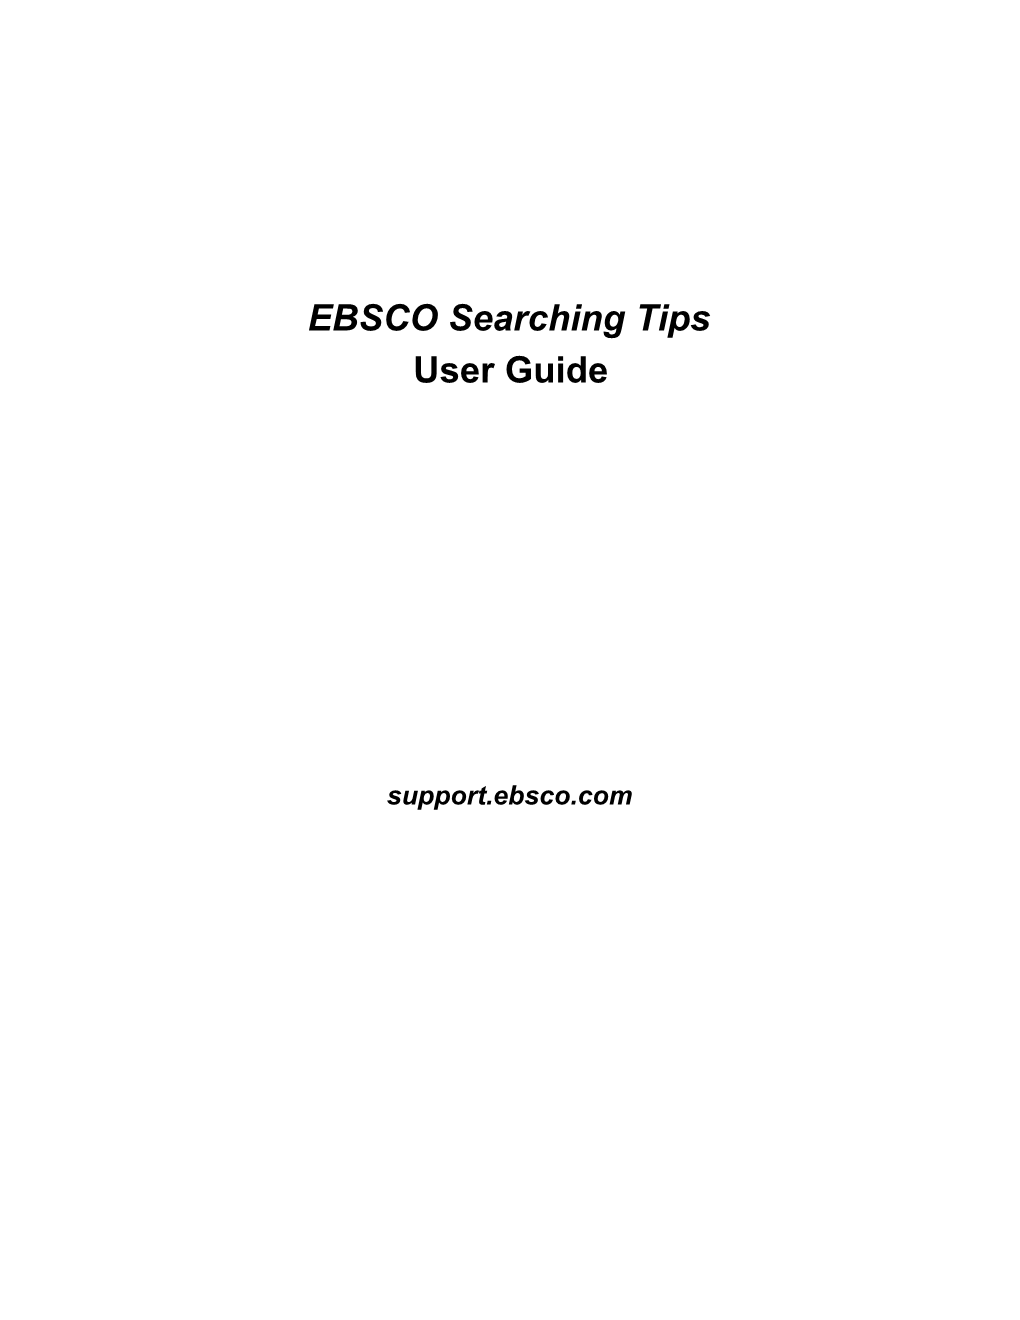 EBSCO Searching Tips